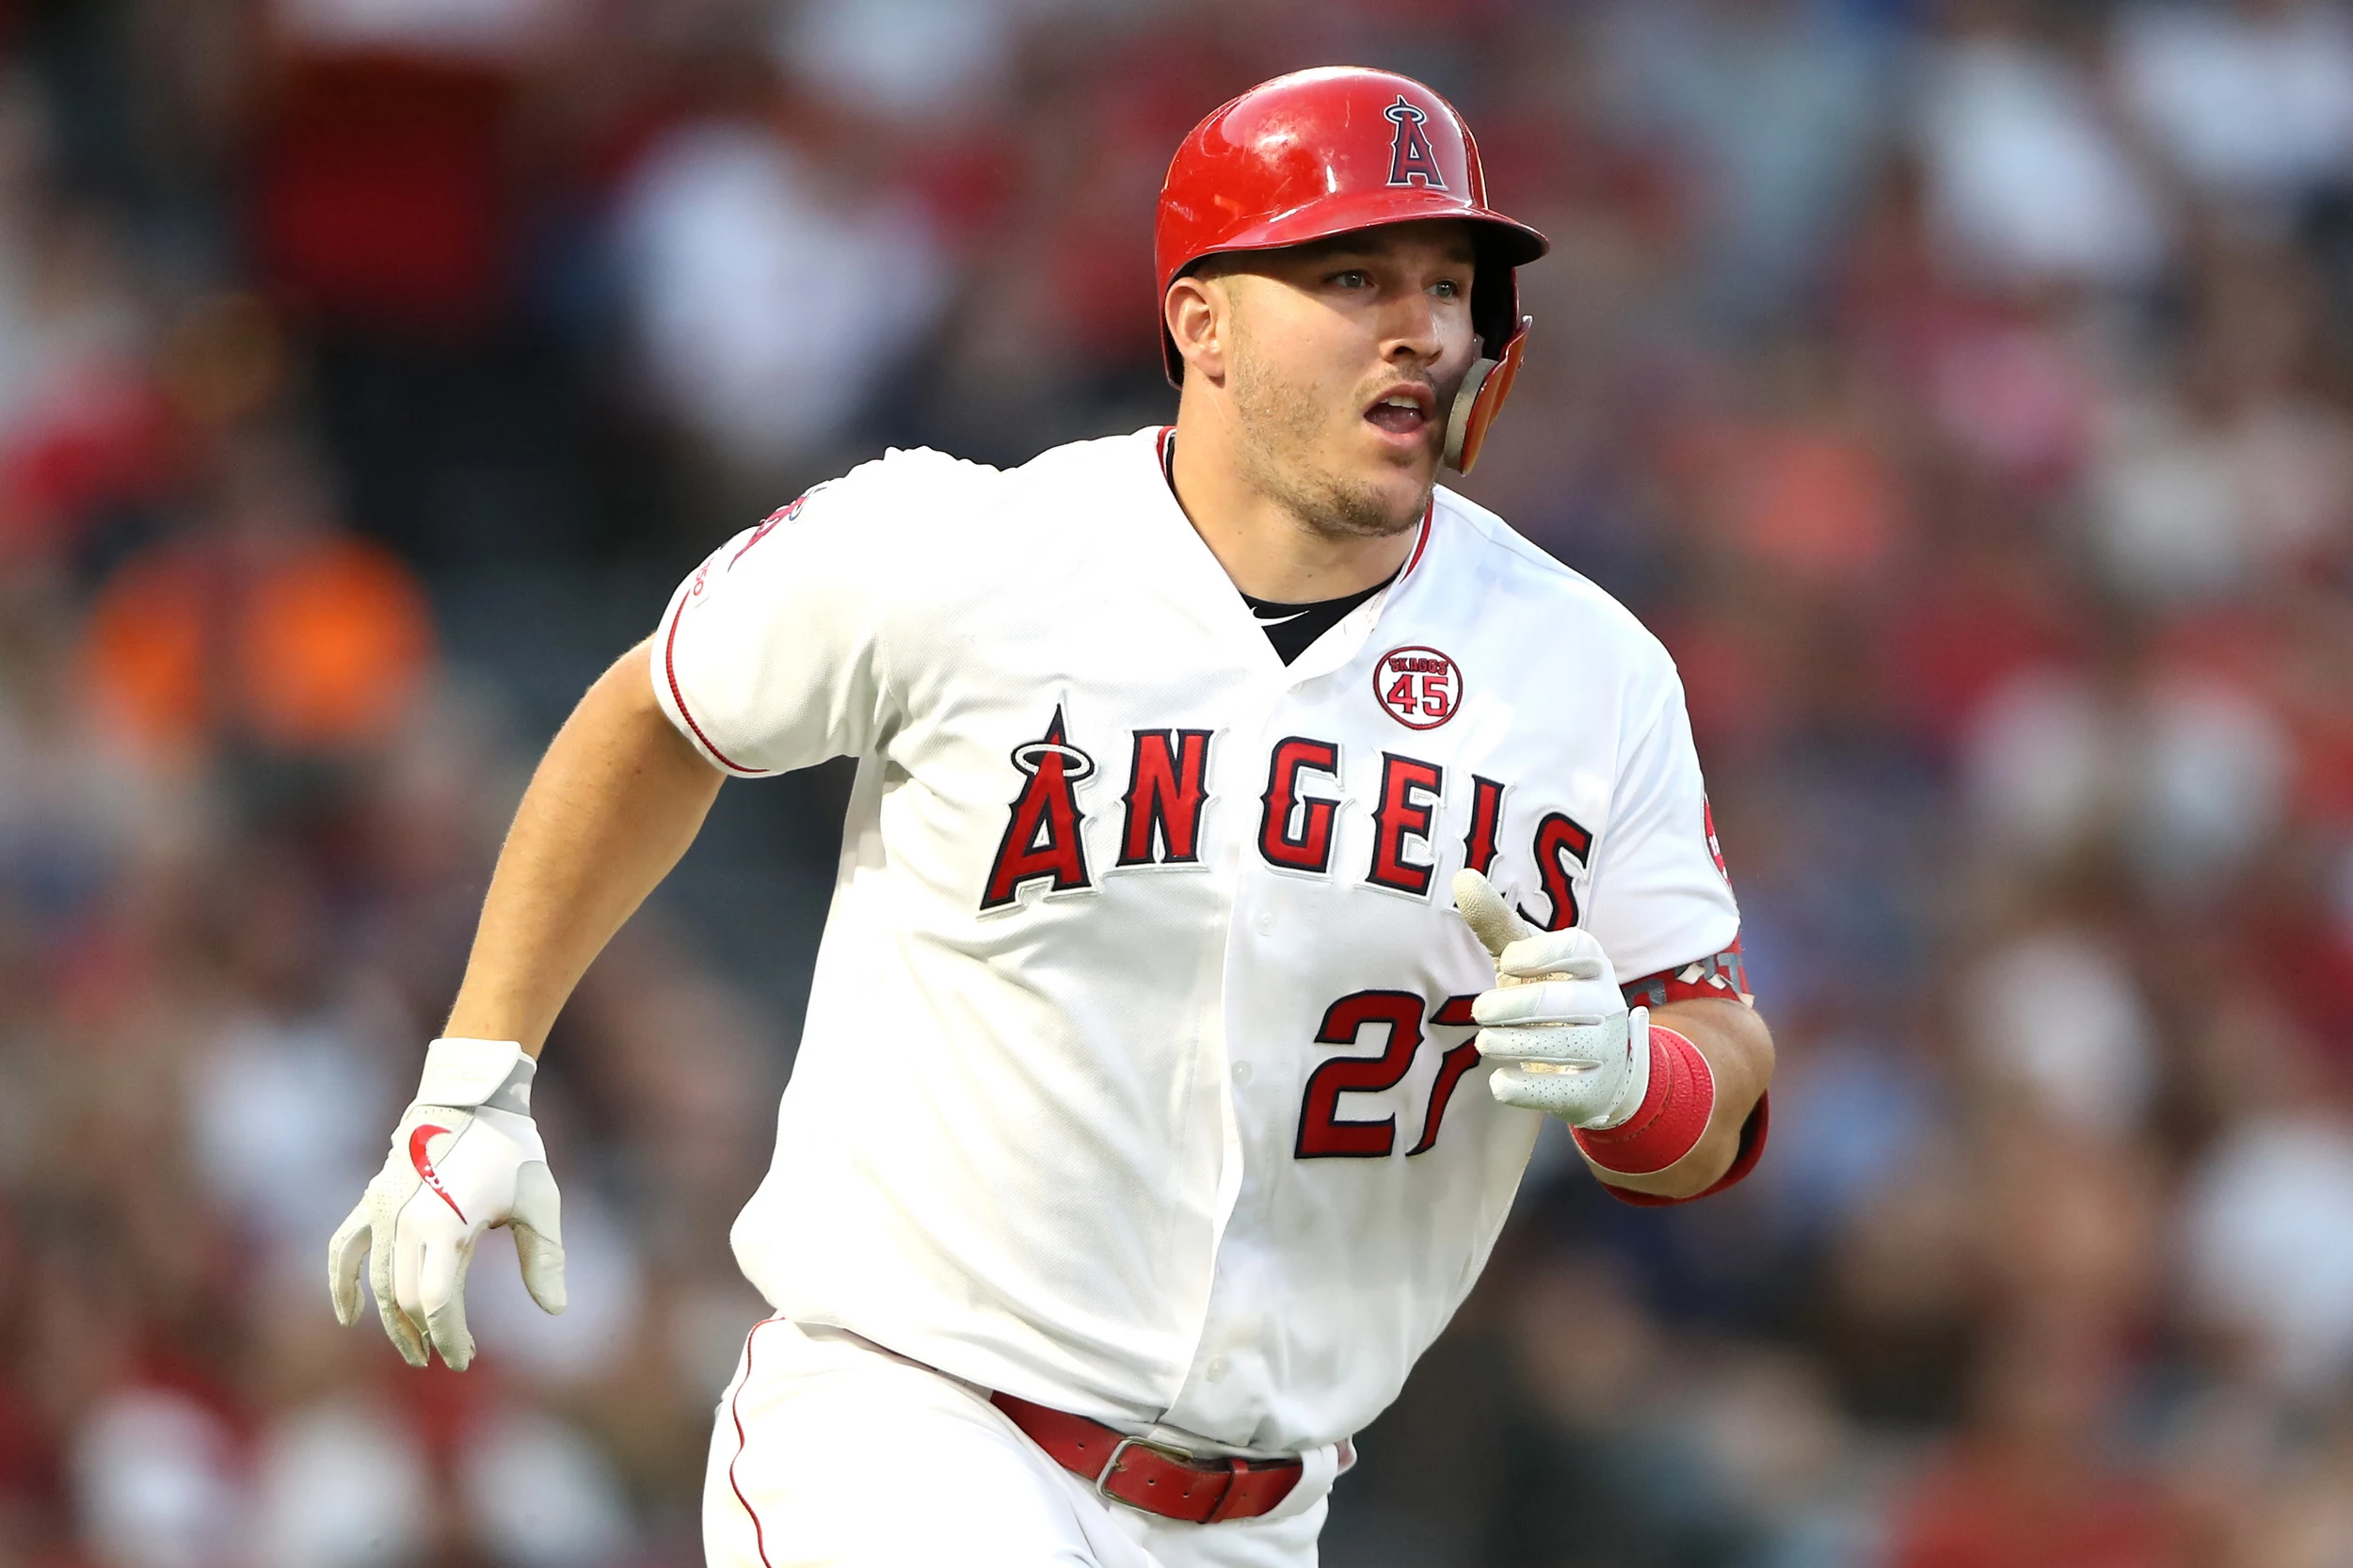 Son of Scott Brosius Hurls HGH Claim at Mike Trout, Then Rescinds